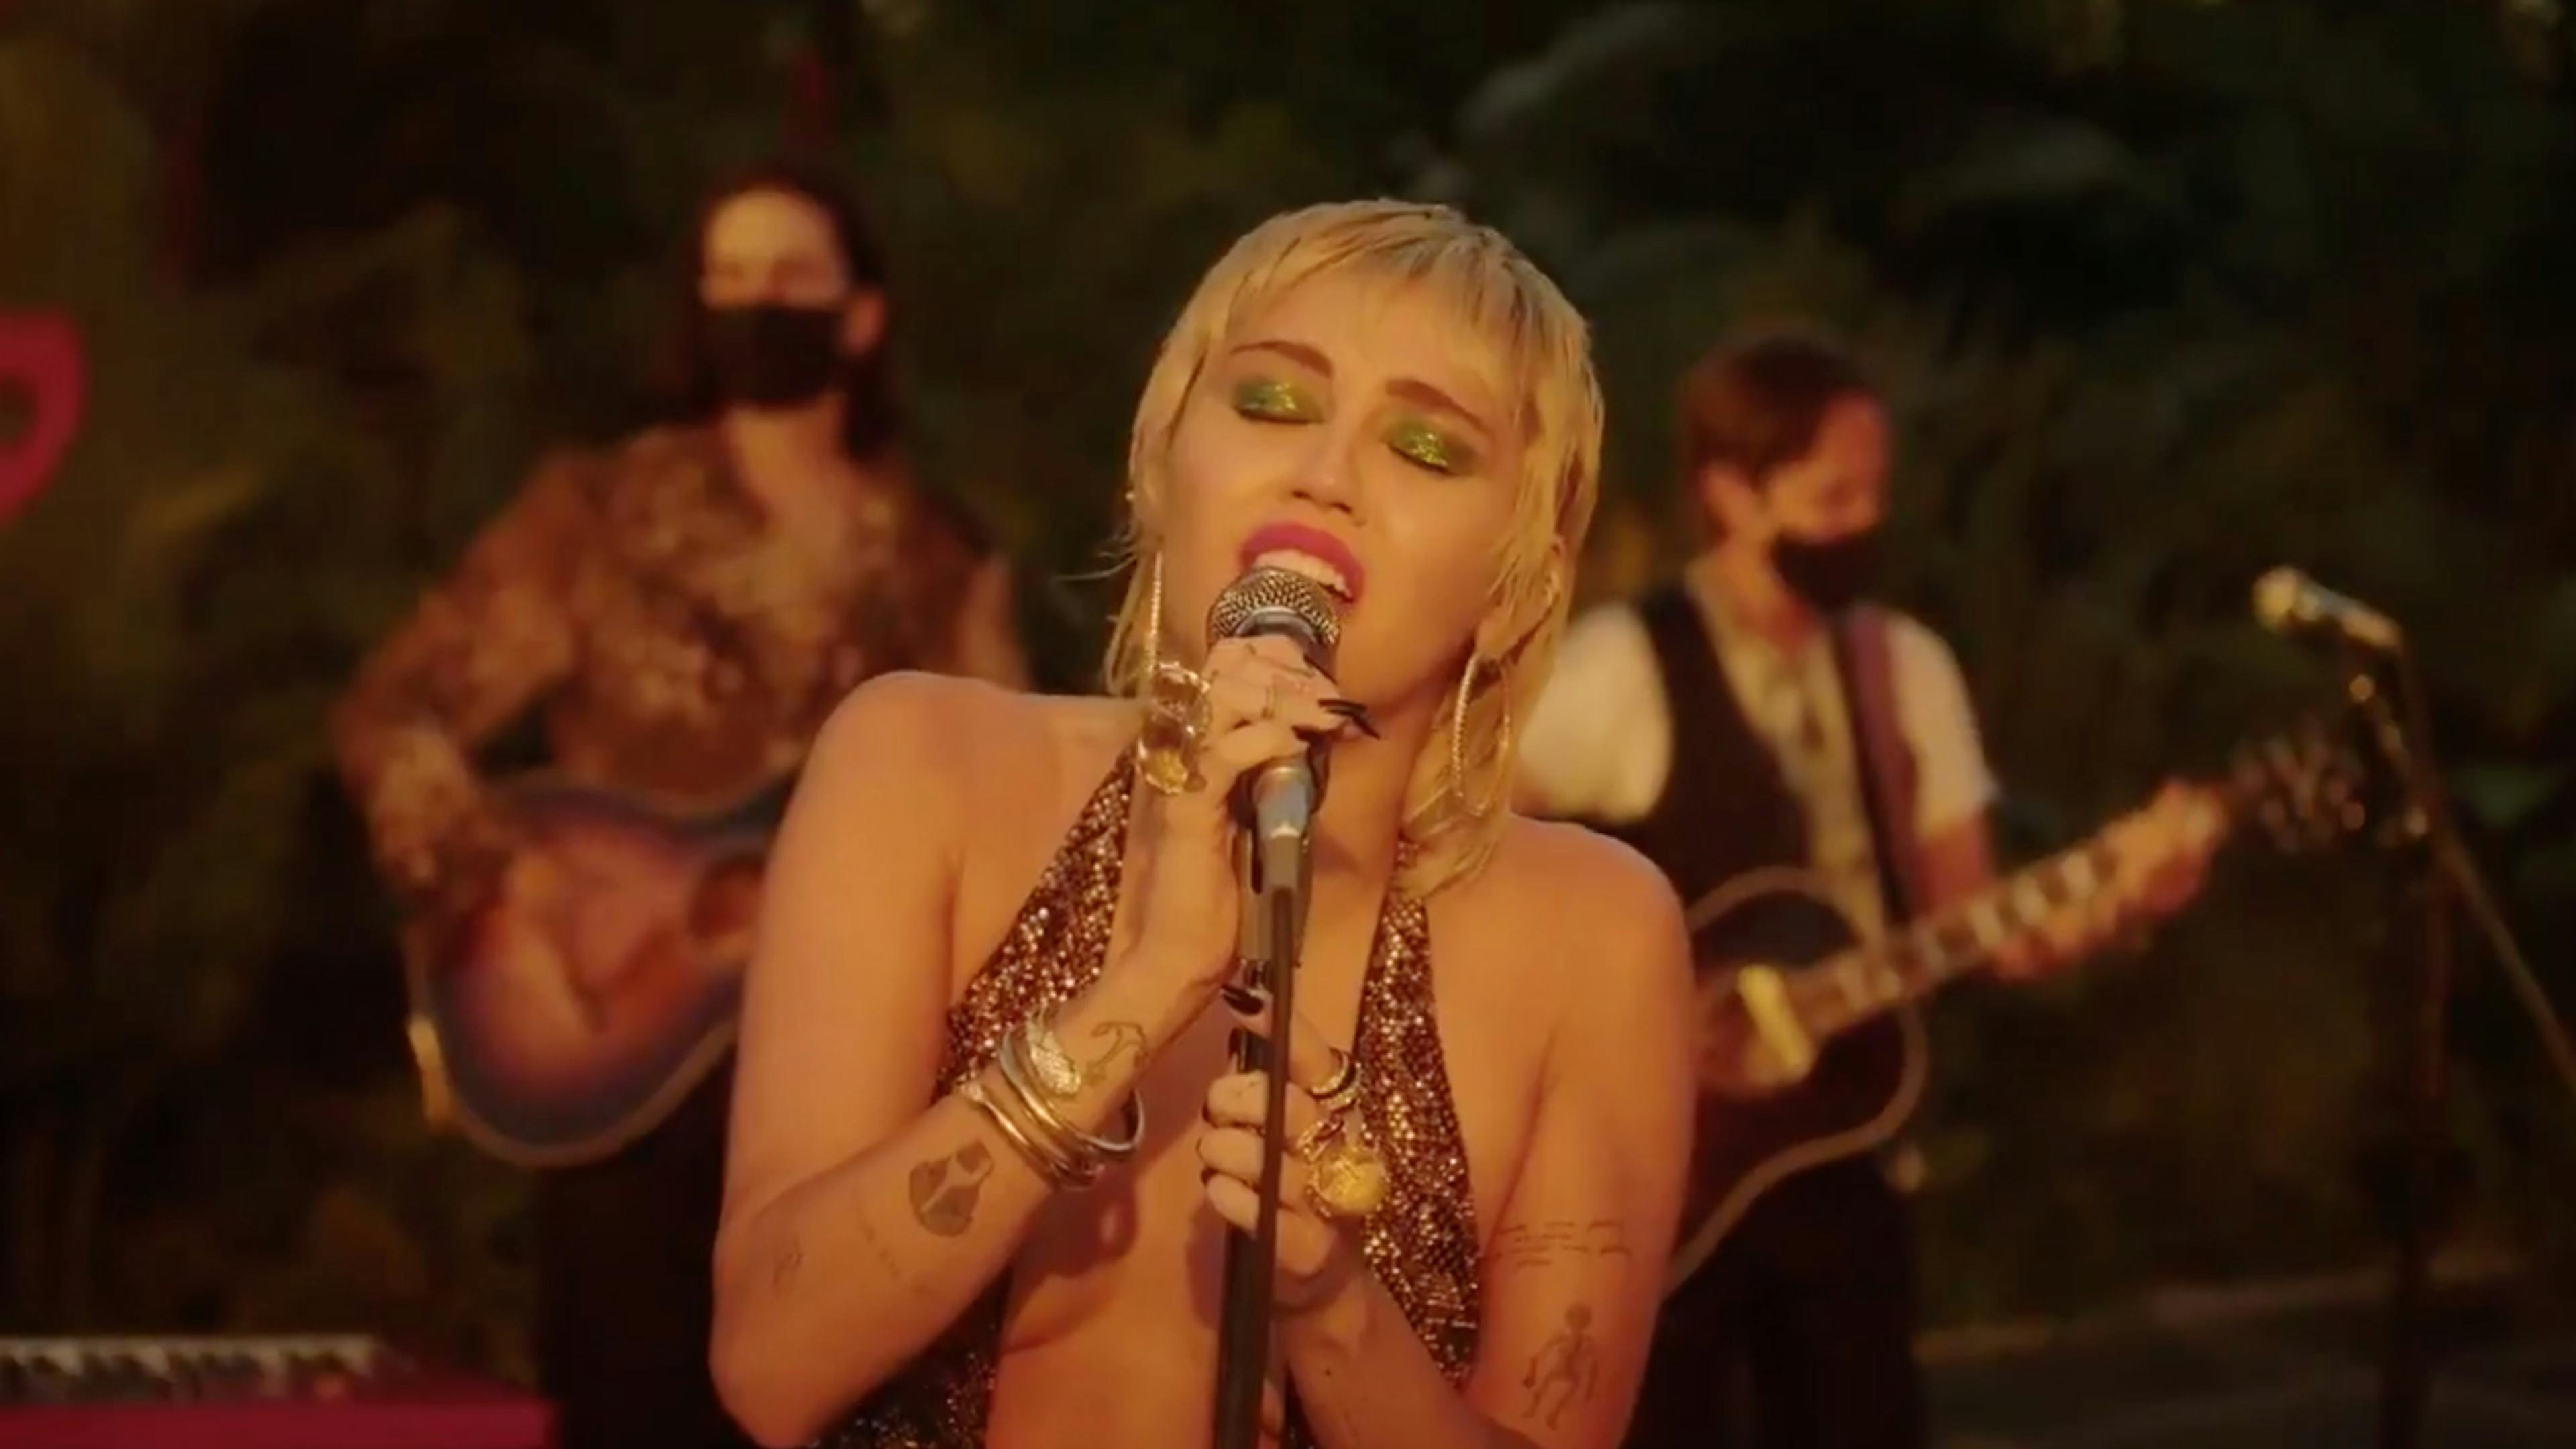 Watch Miley Cyrus' Beautiful Cover Of Pearl Jam's Just Breathe